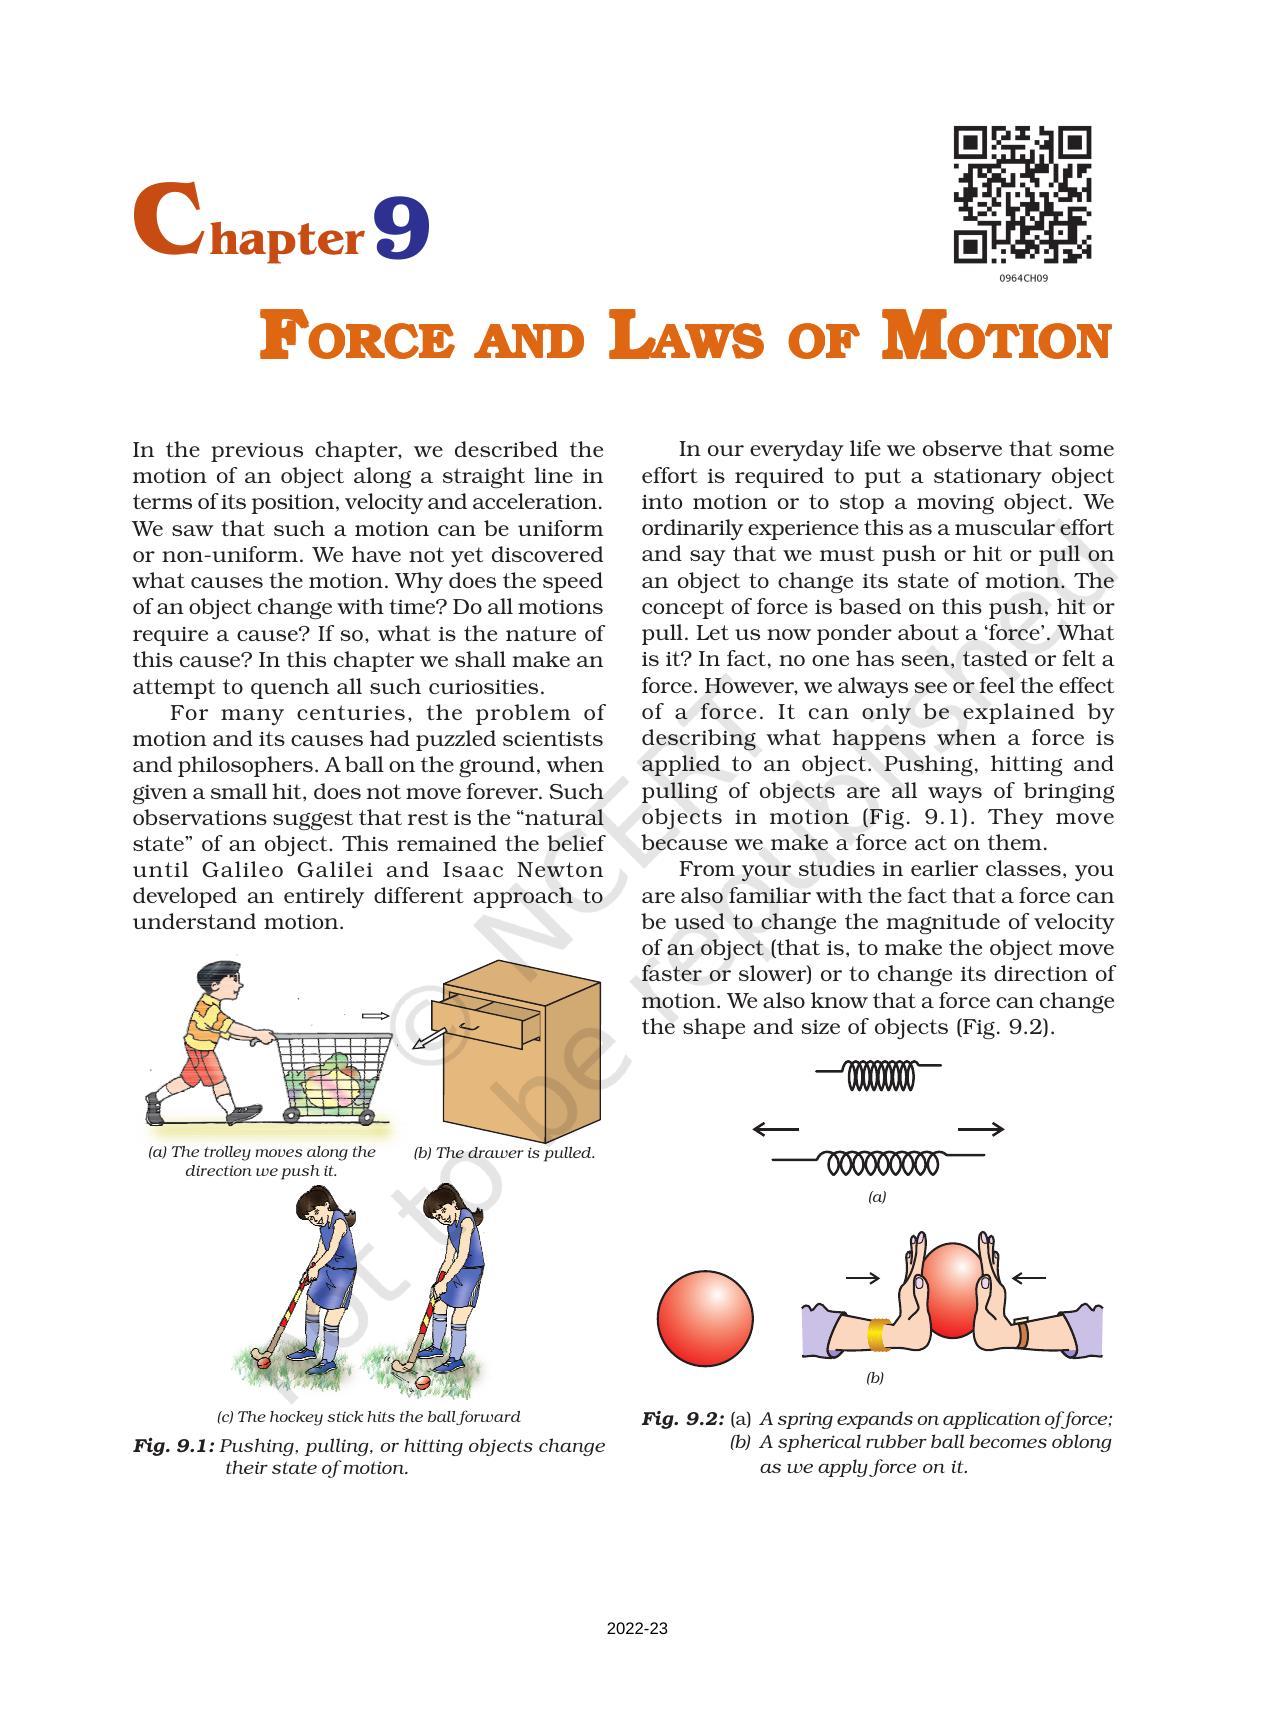 NCERT Book for Class 9 Science Chapter 9 Force And Laws Of Motion - Page 1